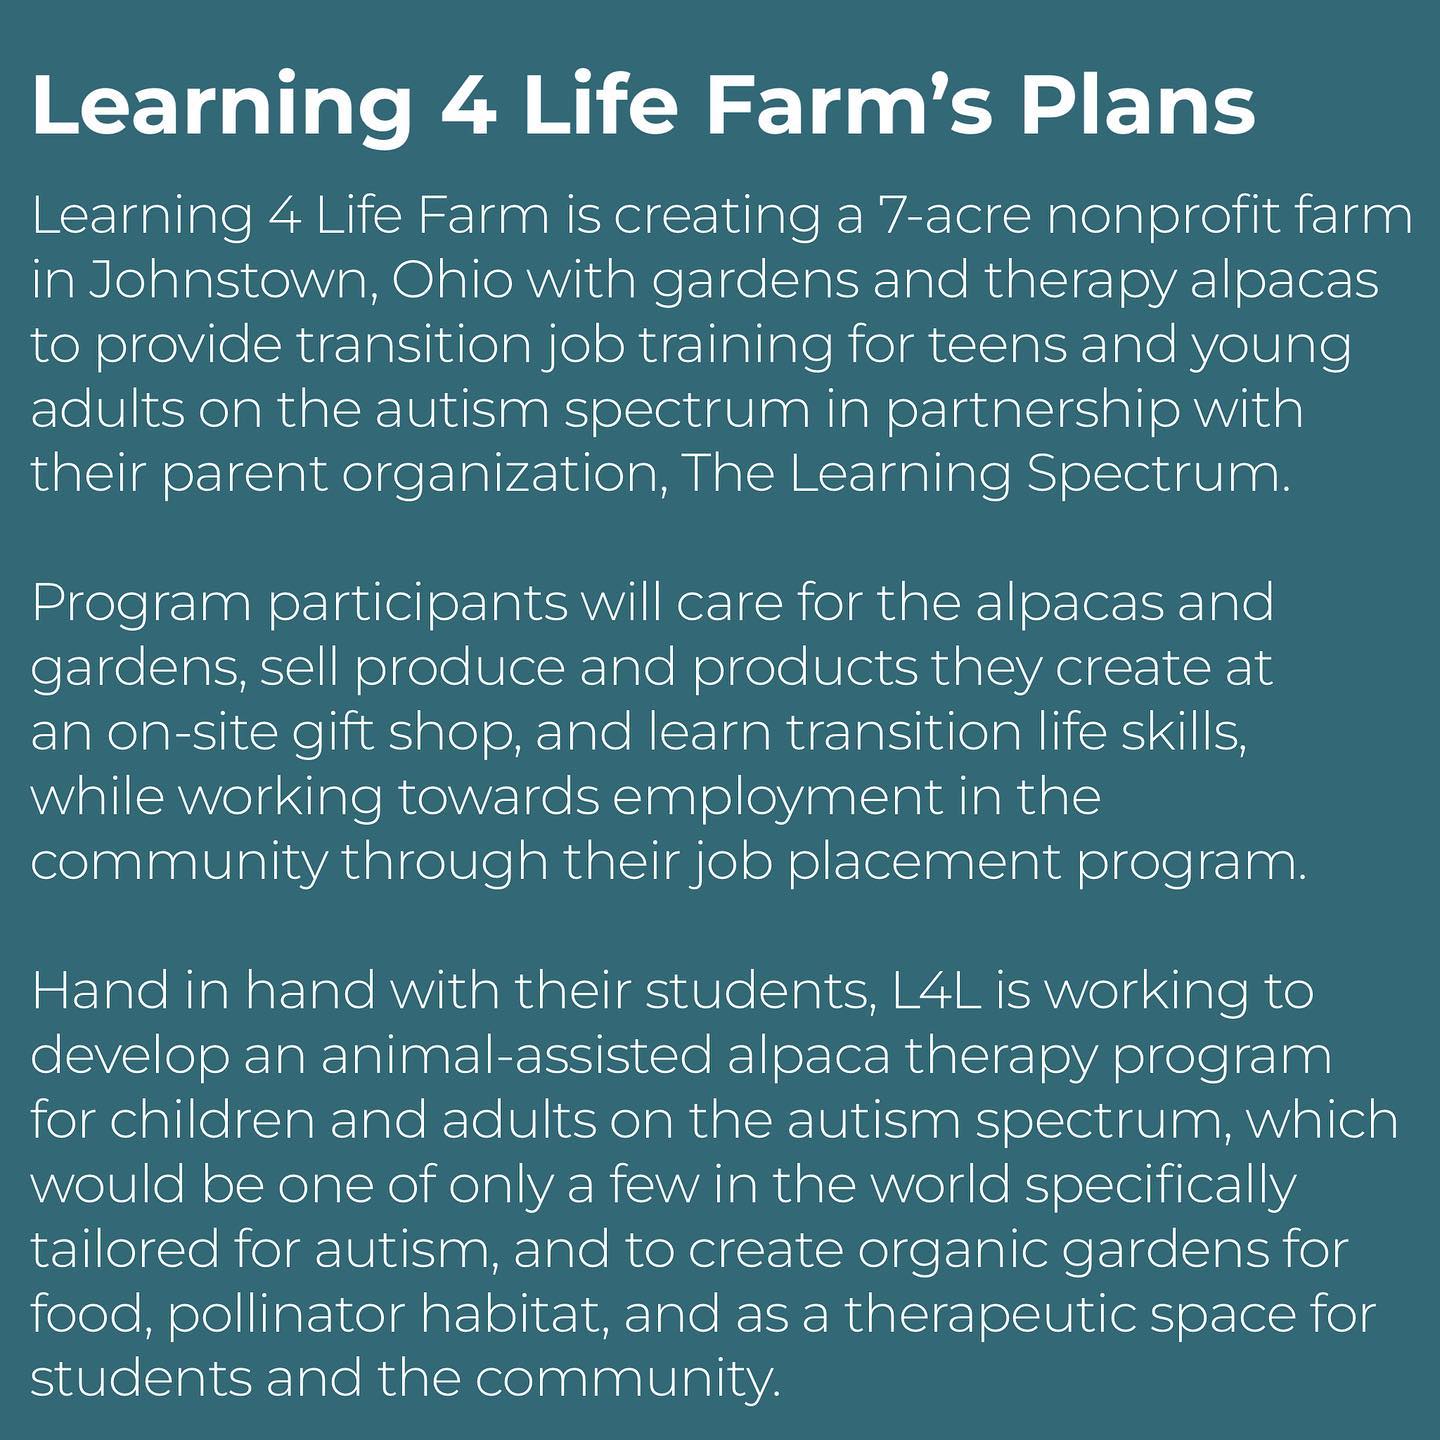 Learning 4 Life's Farm Plans